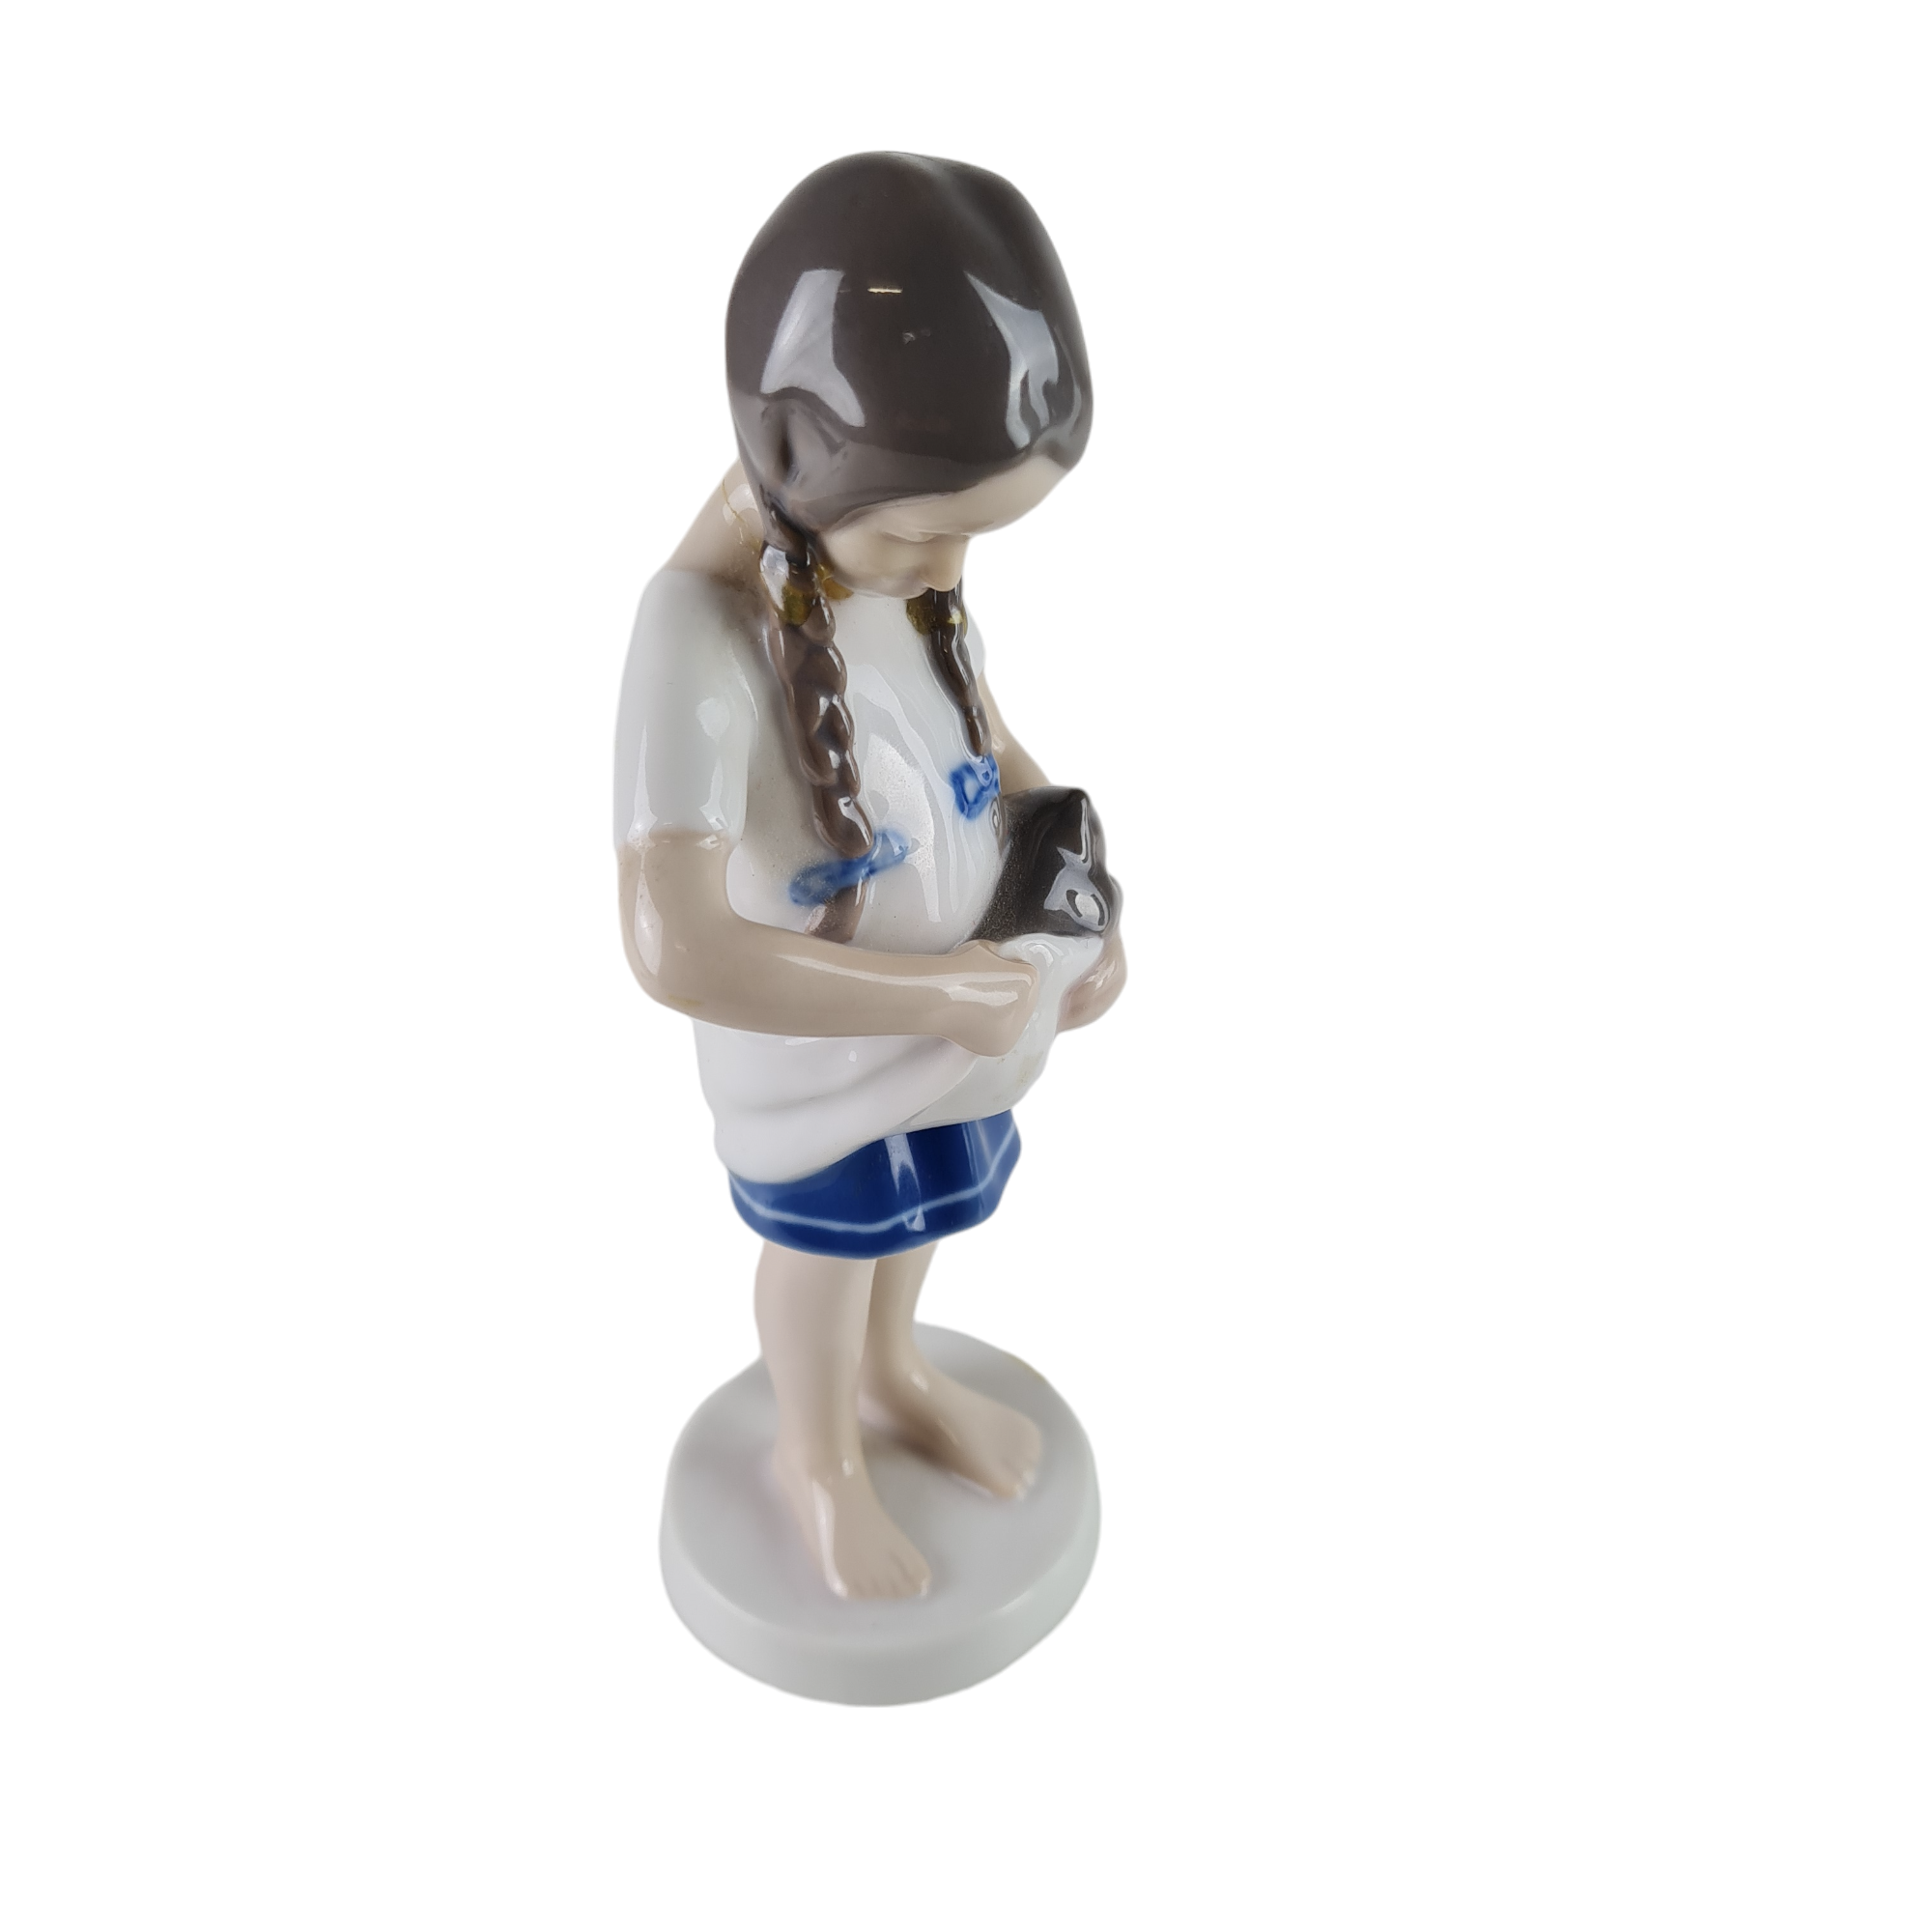 Homco 1424 Girl with Blue Bird and Cage Porcelain Figurine Green dress  pigtails